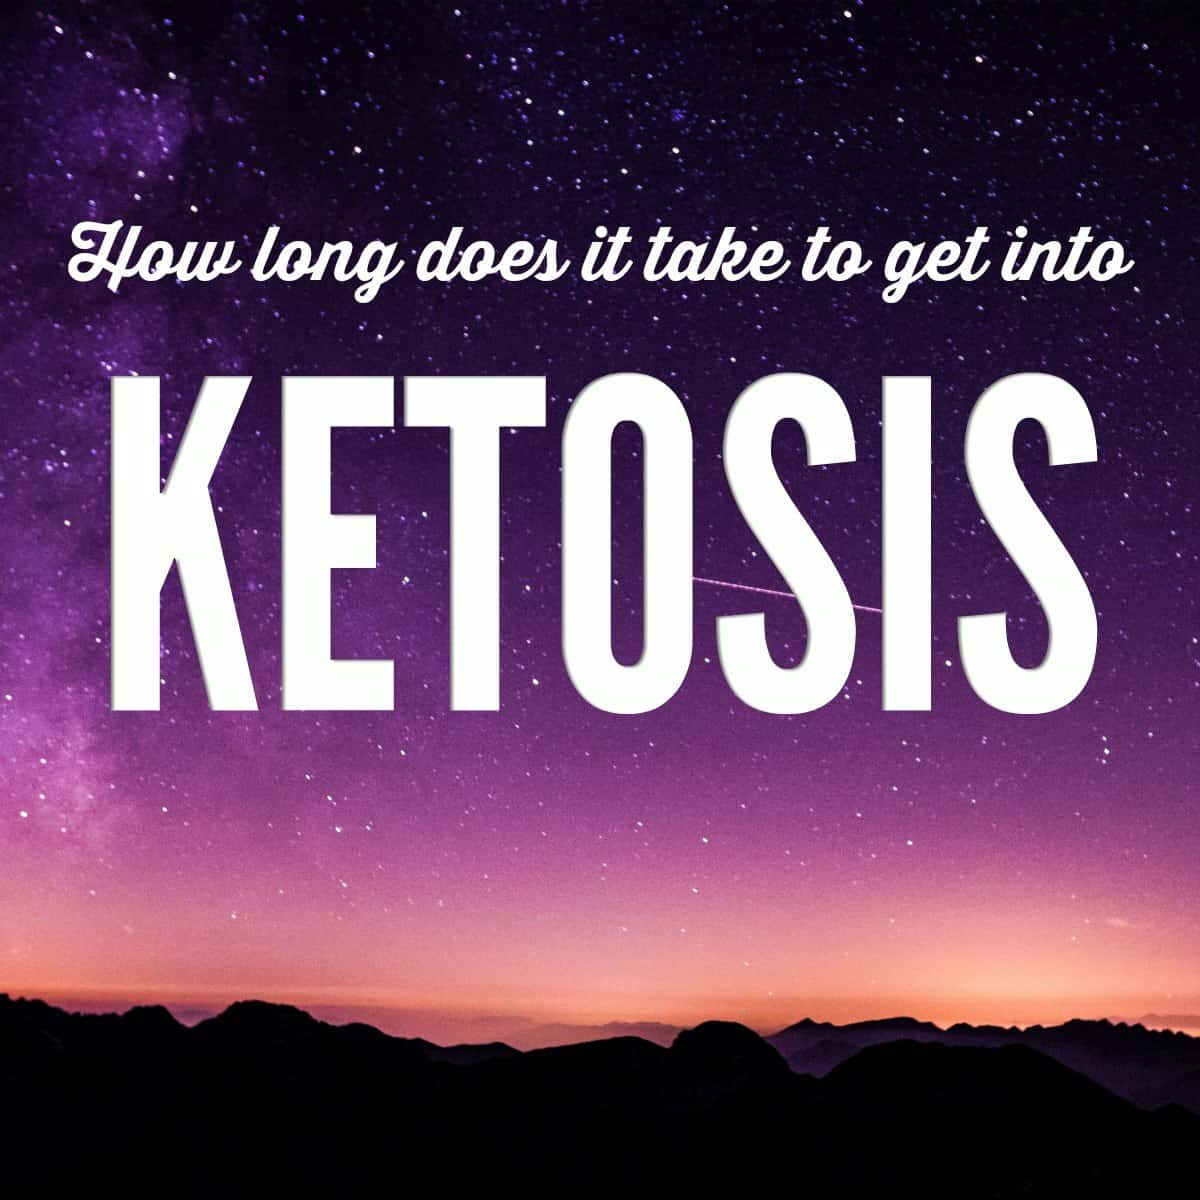 How Long Does it Take to Get Into Ketosis?? How do I test for this? This article answers all of those questions plus gives some tips you didn't even consider!